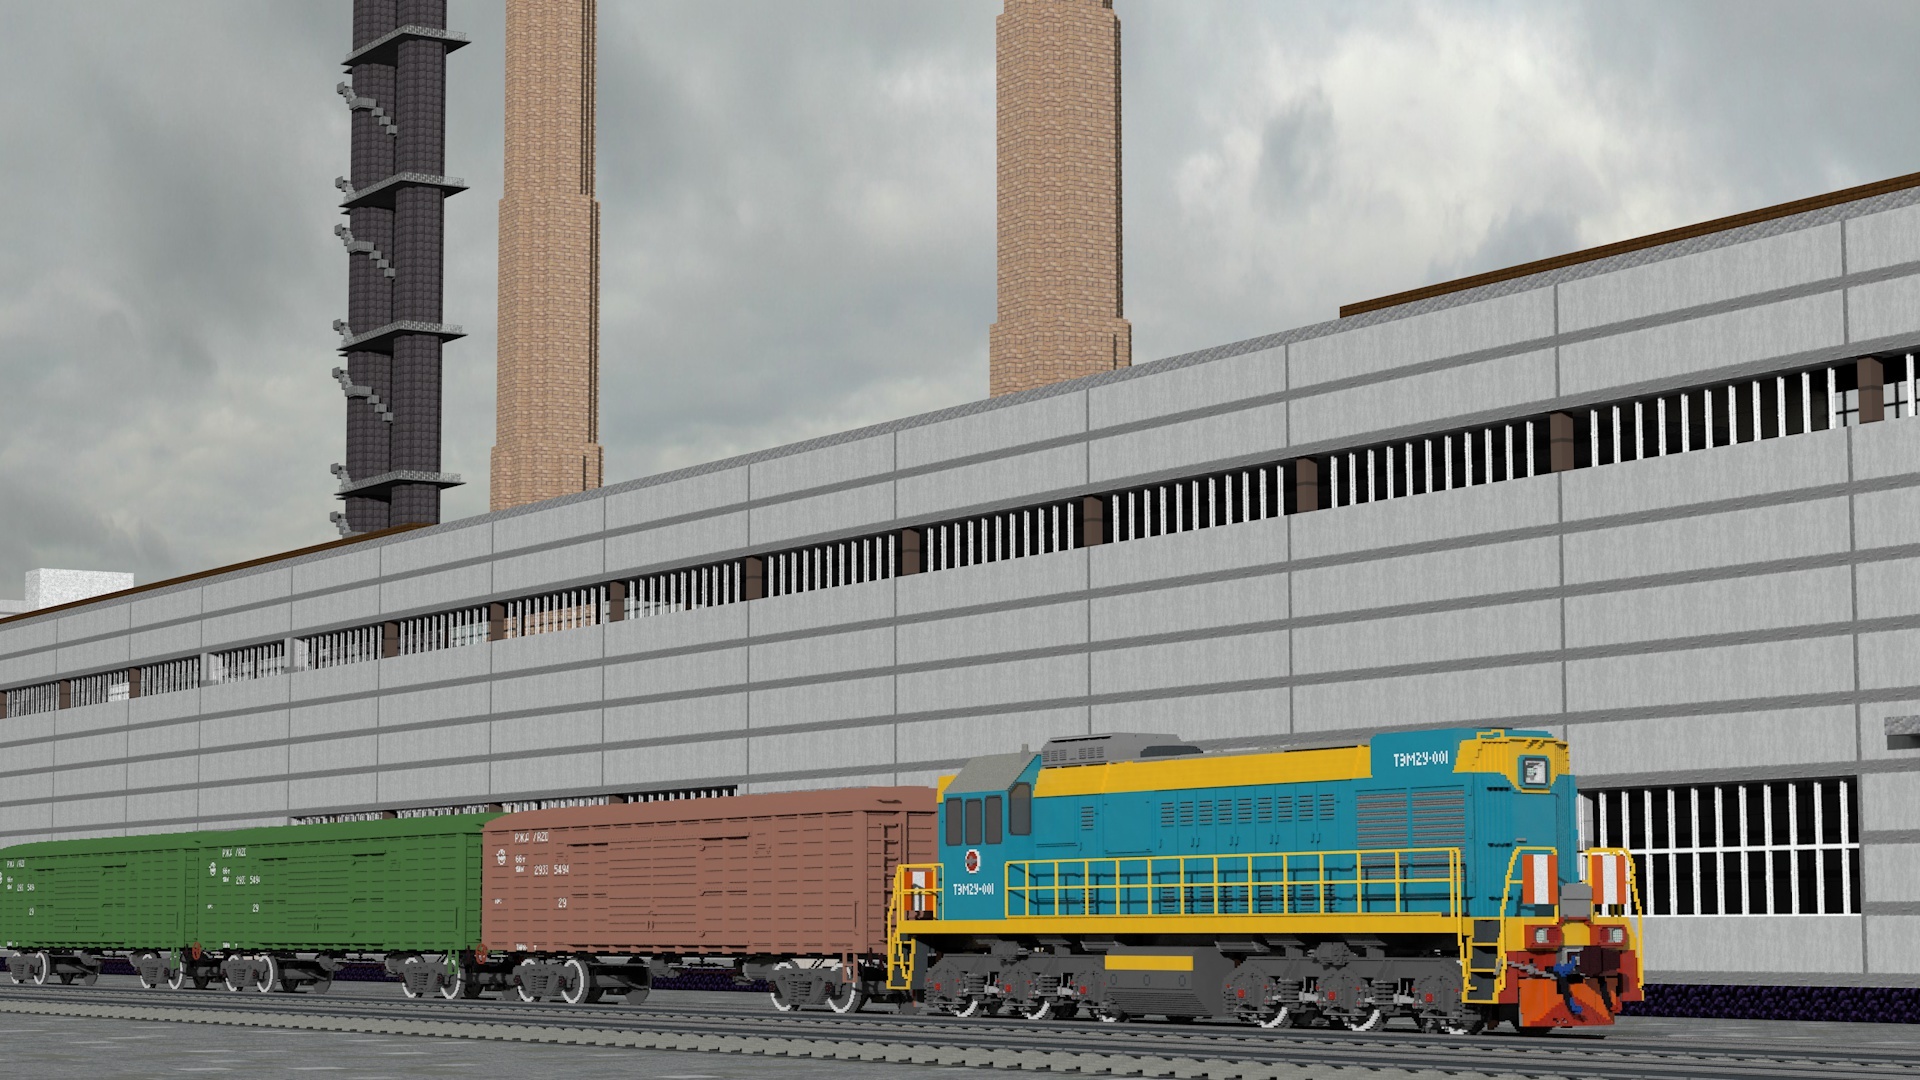 Quadratish. Practical. Gut - My, Architecture, Russia, Town, RSFSR, Minecraft, Computer games, Industry, Moscow, Factory, Electronics, Building, Locomotive, Railway, Industrial zone, Longpost, 